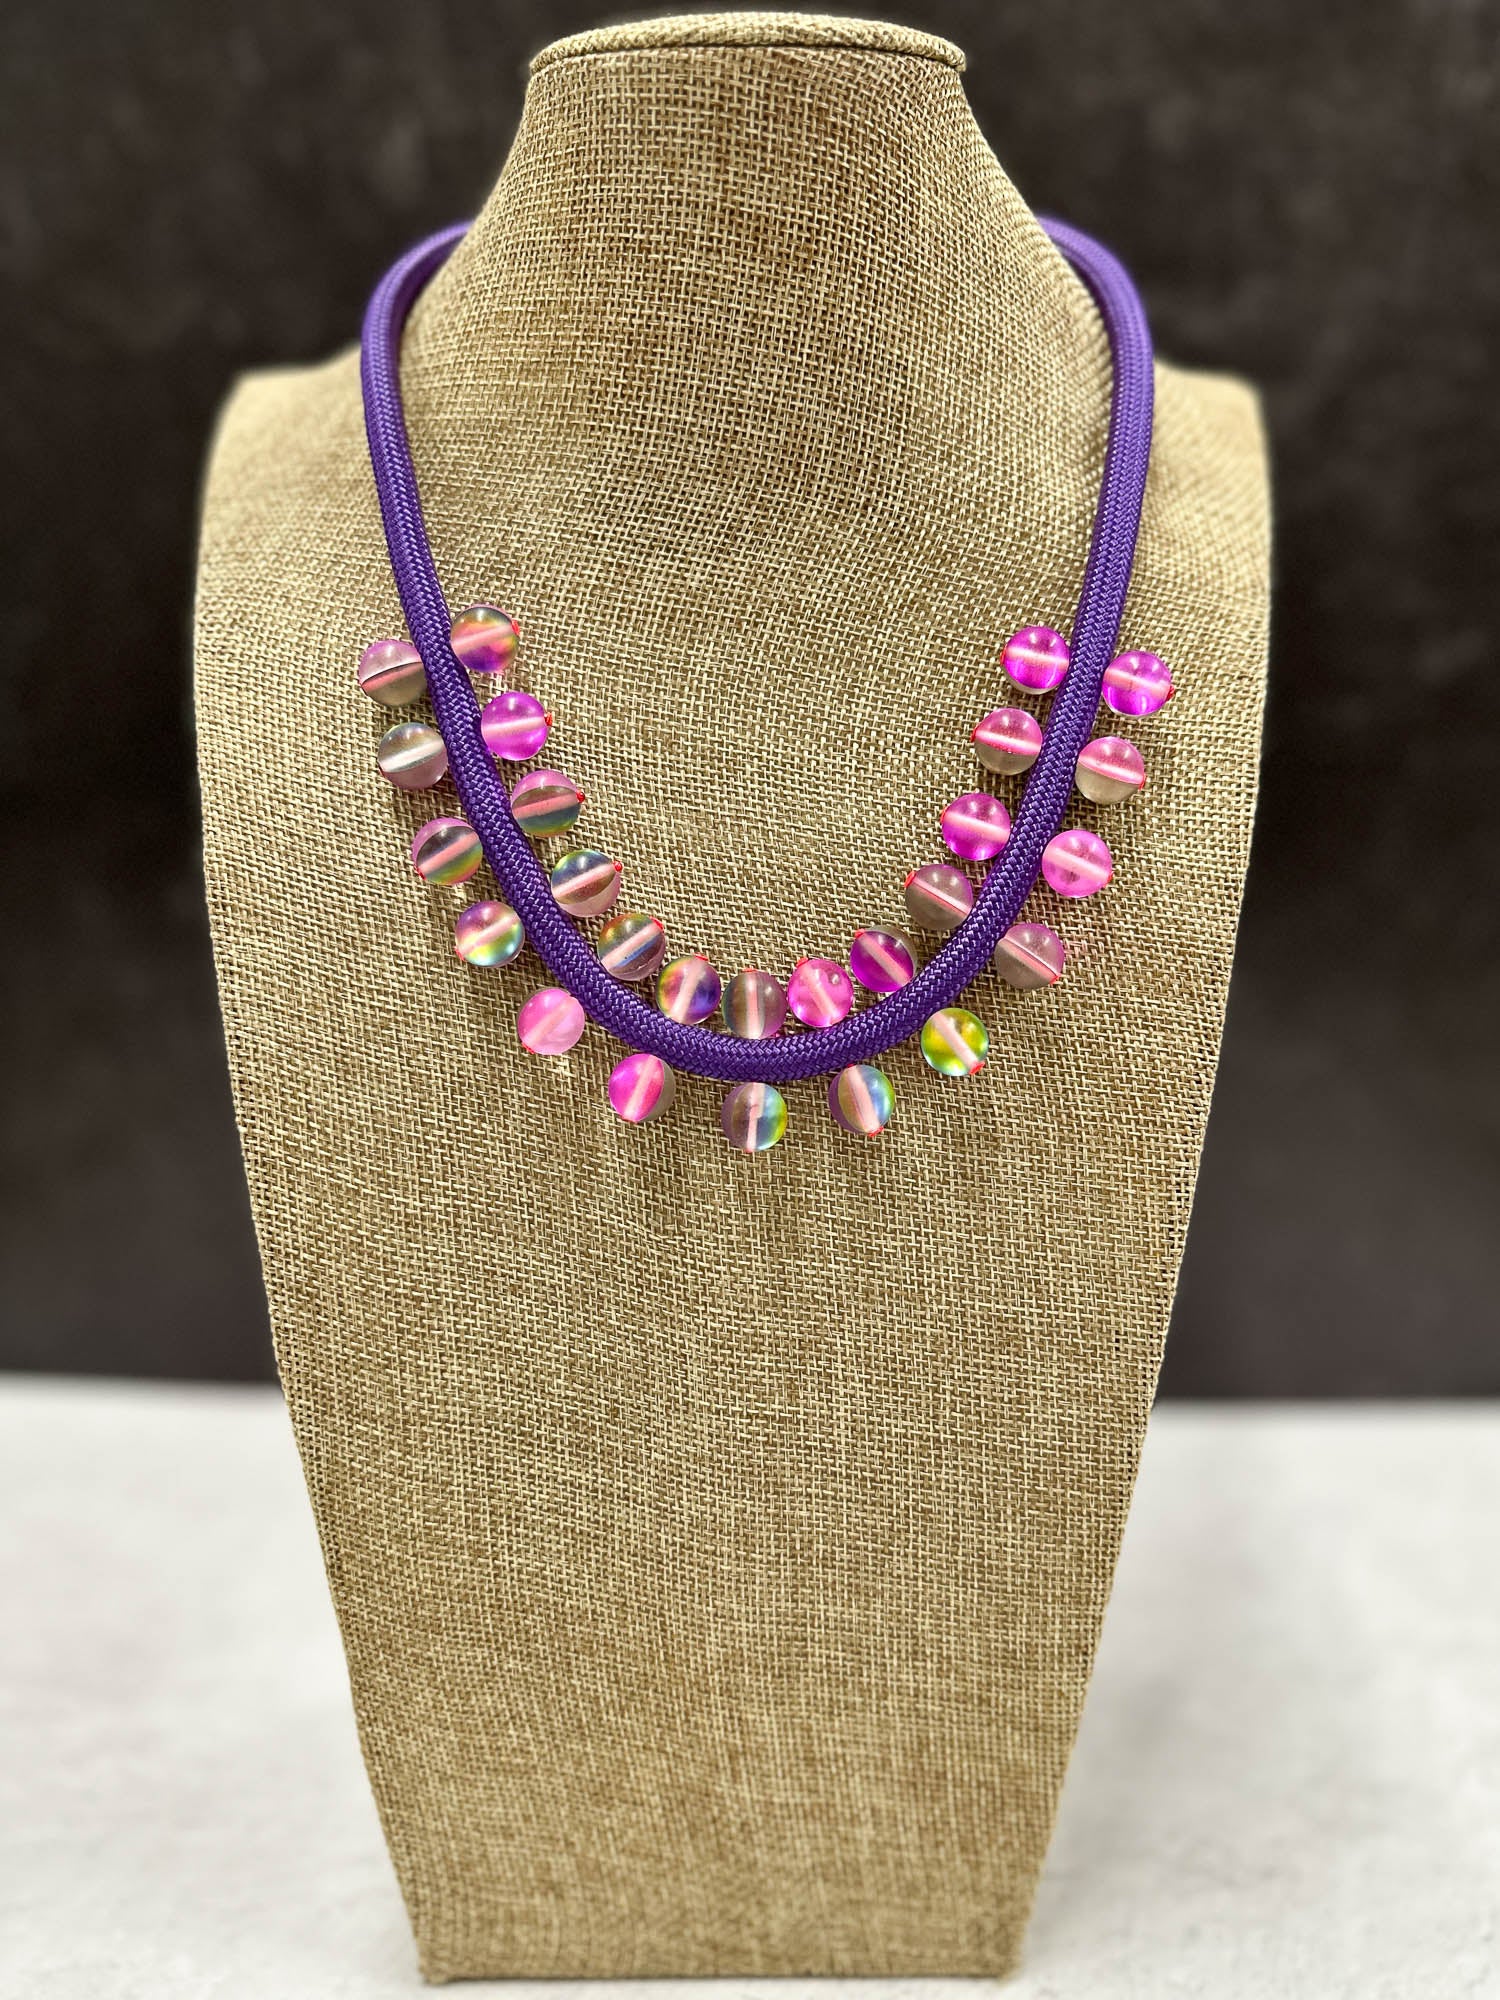 Glass Beads on Cord Necklace, Purple